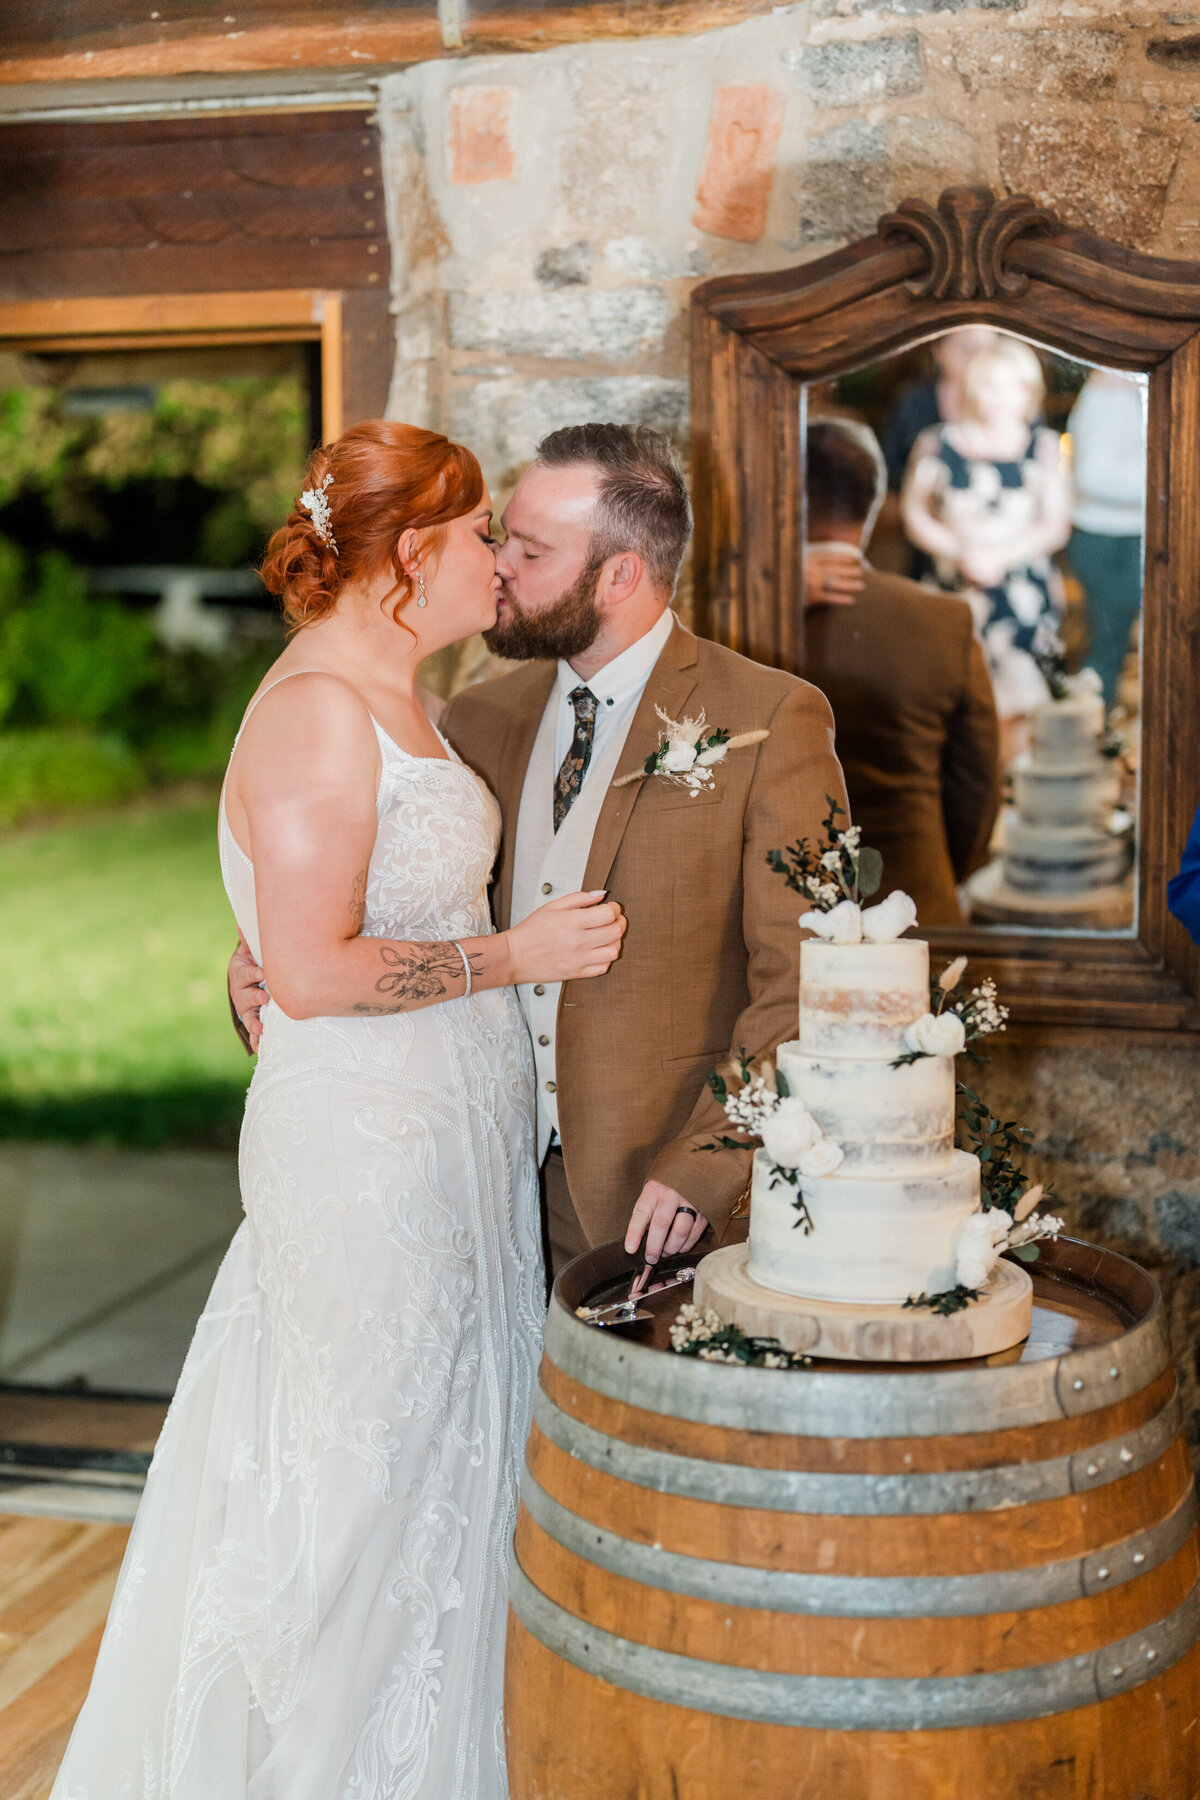 Rustic wedding at The Old Coach Stable